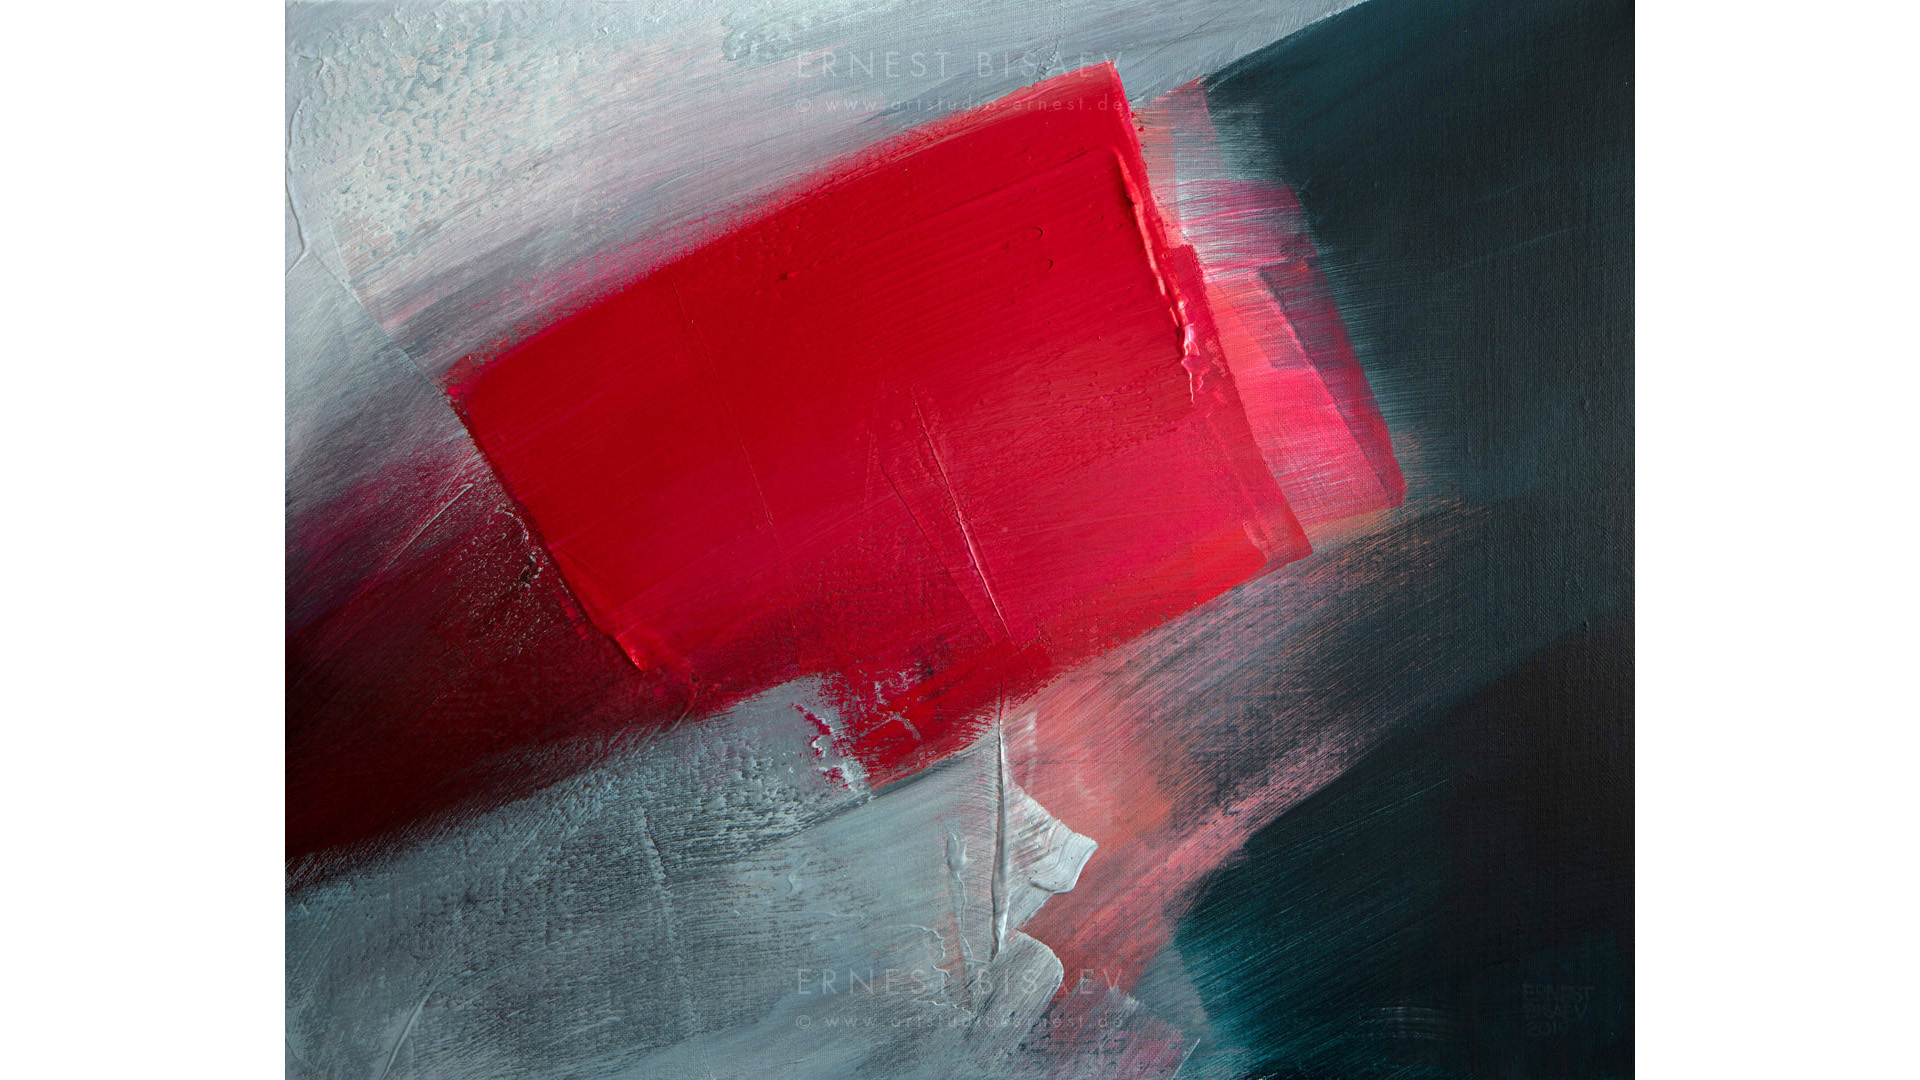 Gray and Red 231019, Acrylic on Canvas, 80x100cm, 2019 © Ernest>Bisaev